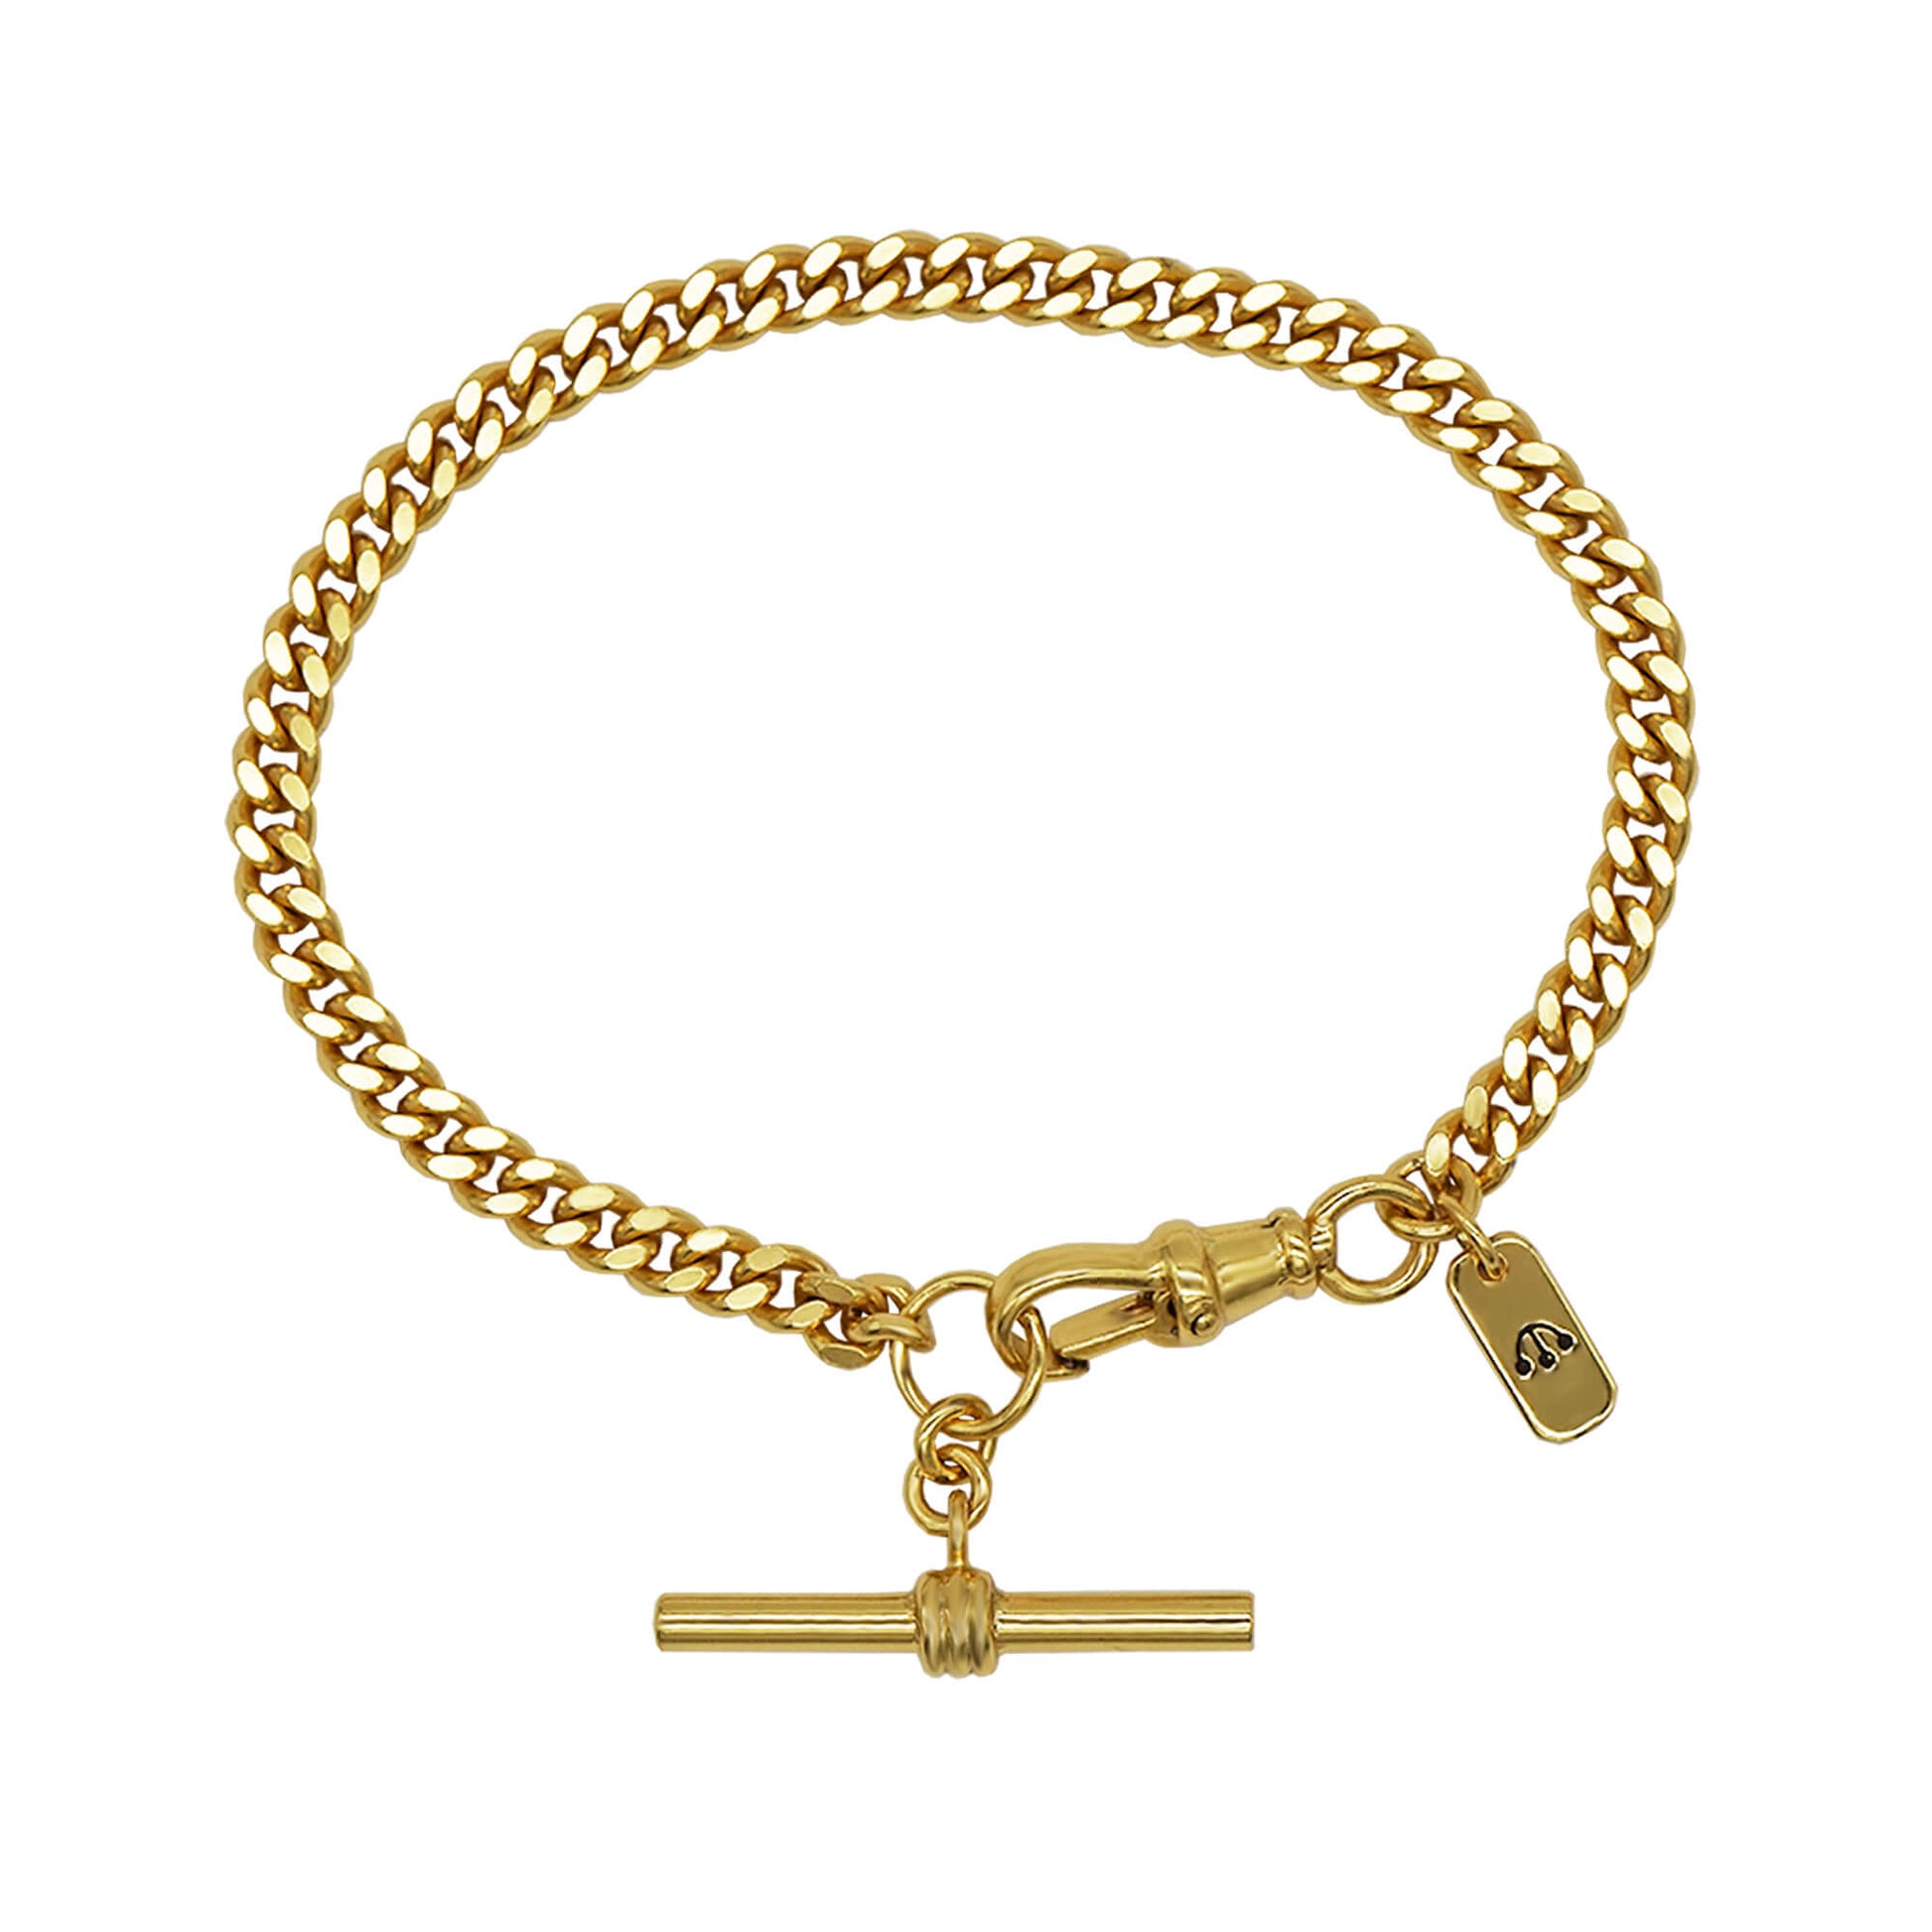 Gold curb chain bracelet with T bar charm and tag with pawnshop logo.